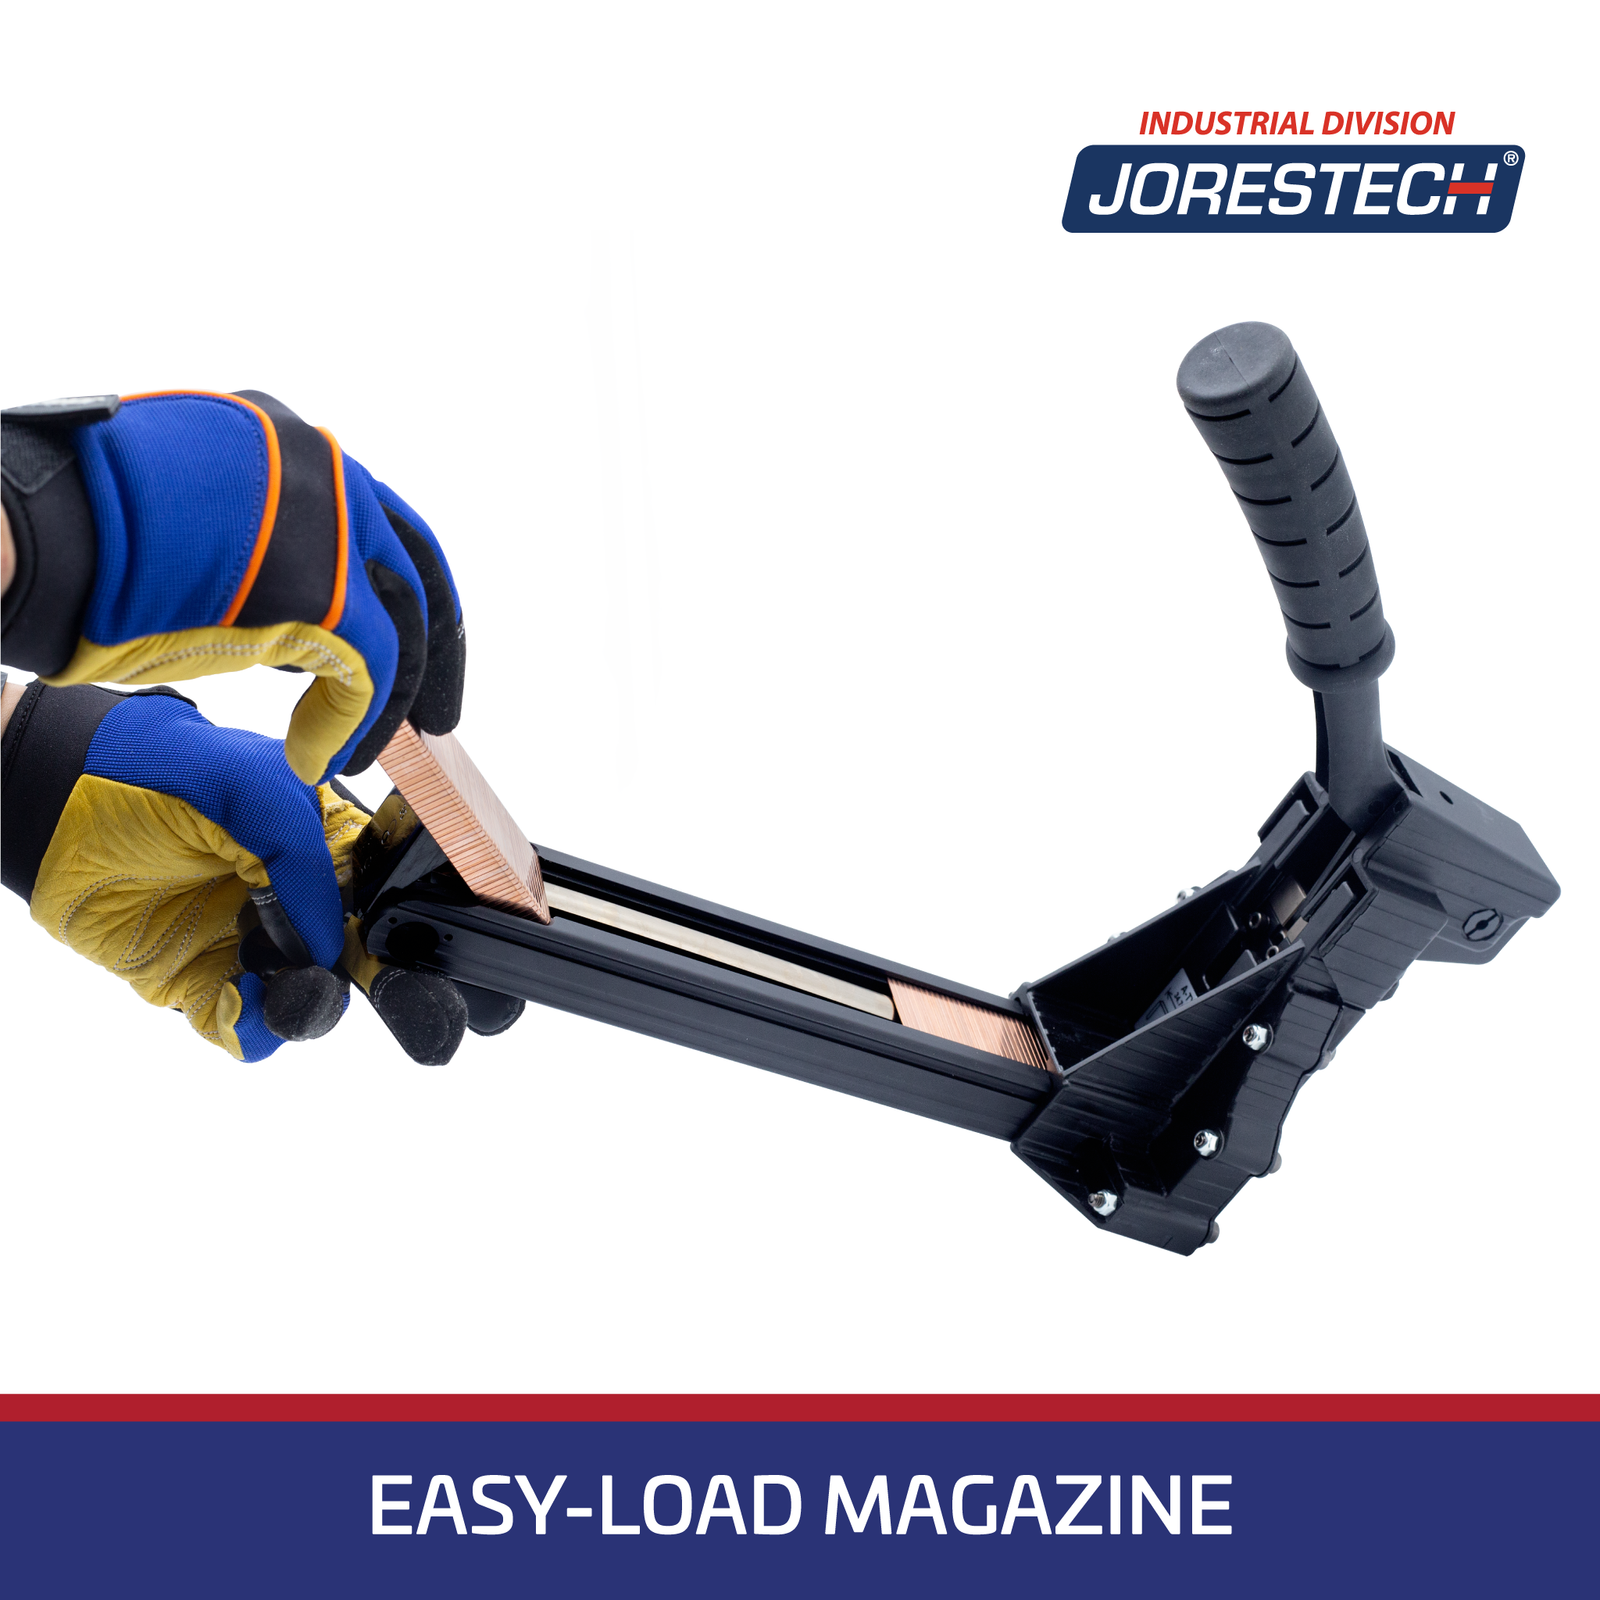 operator wearing blue gloves loading black manual carton stapler with copper colored staples. Features blue/red banner that states easy-load magazine and Jorestech logo.